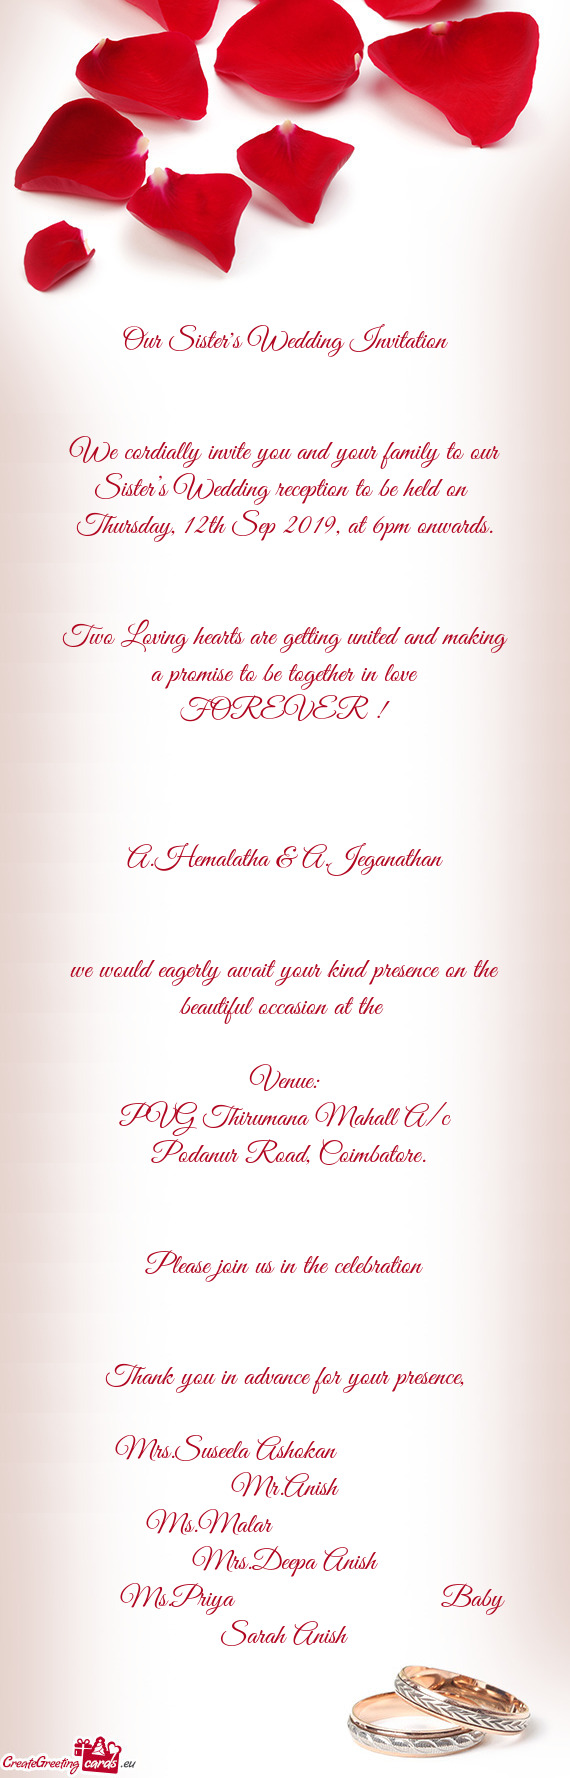 Our Sister's Wedding Invitation - Free cards